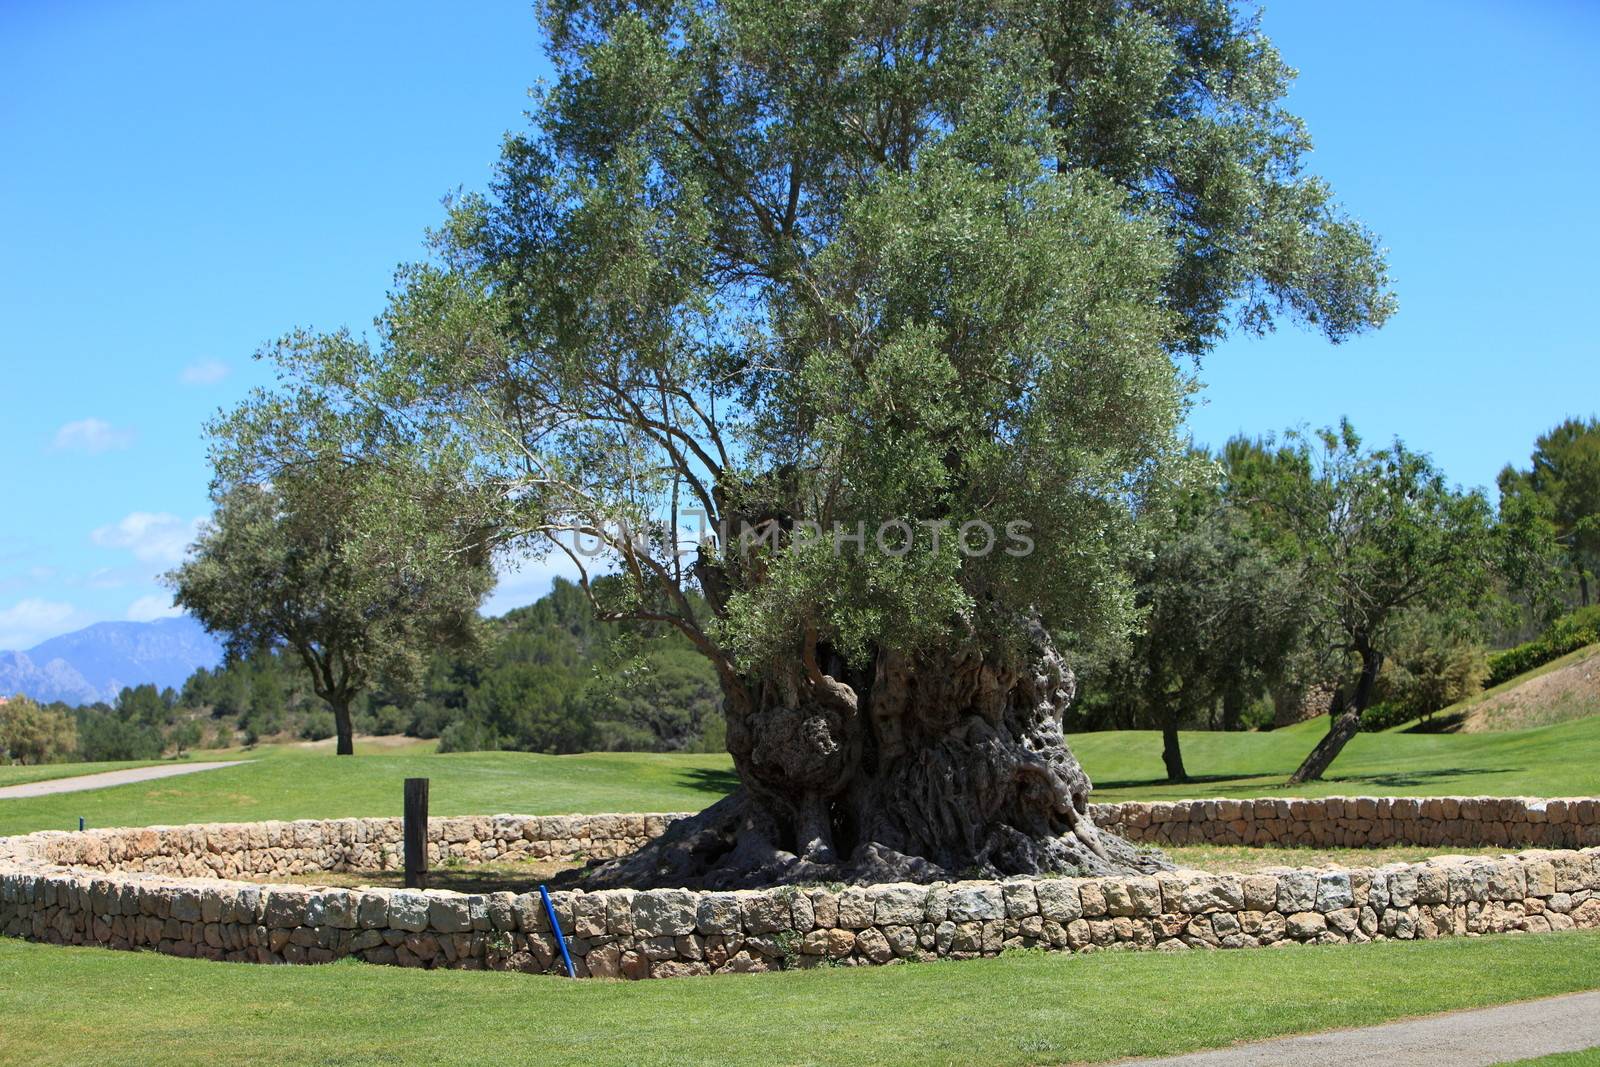 Old walled tree stump sprouting new foliage enclosed within a low circular stone wall on manicured lawns on a golf course or park